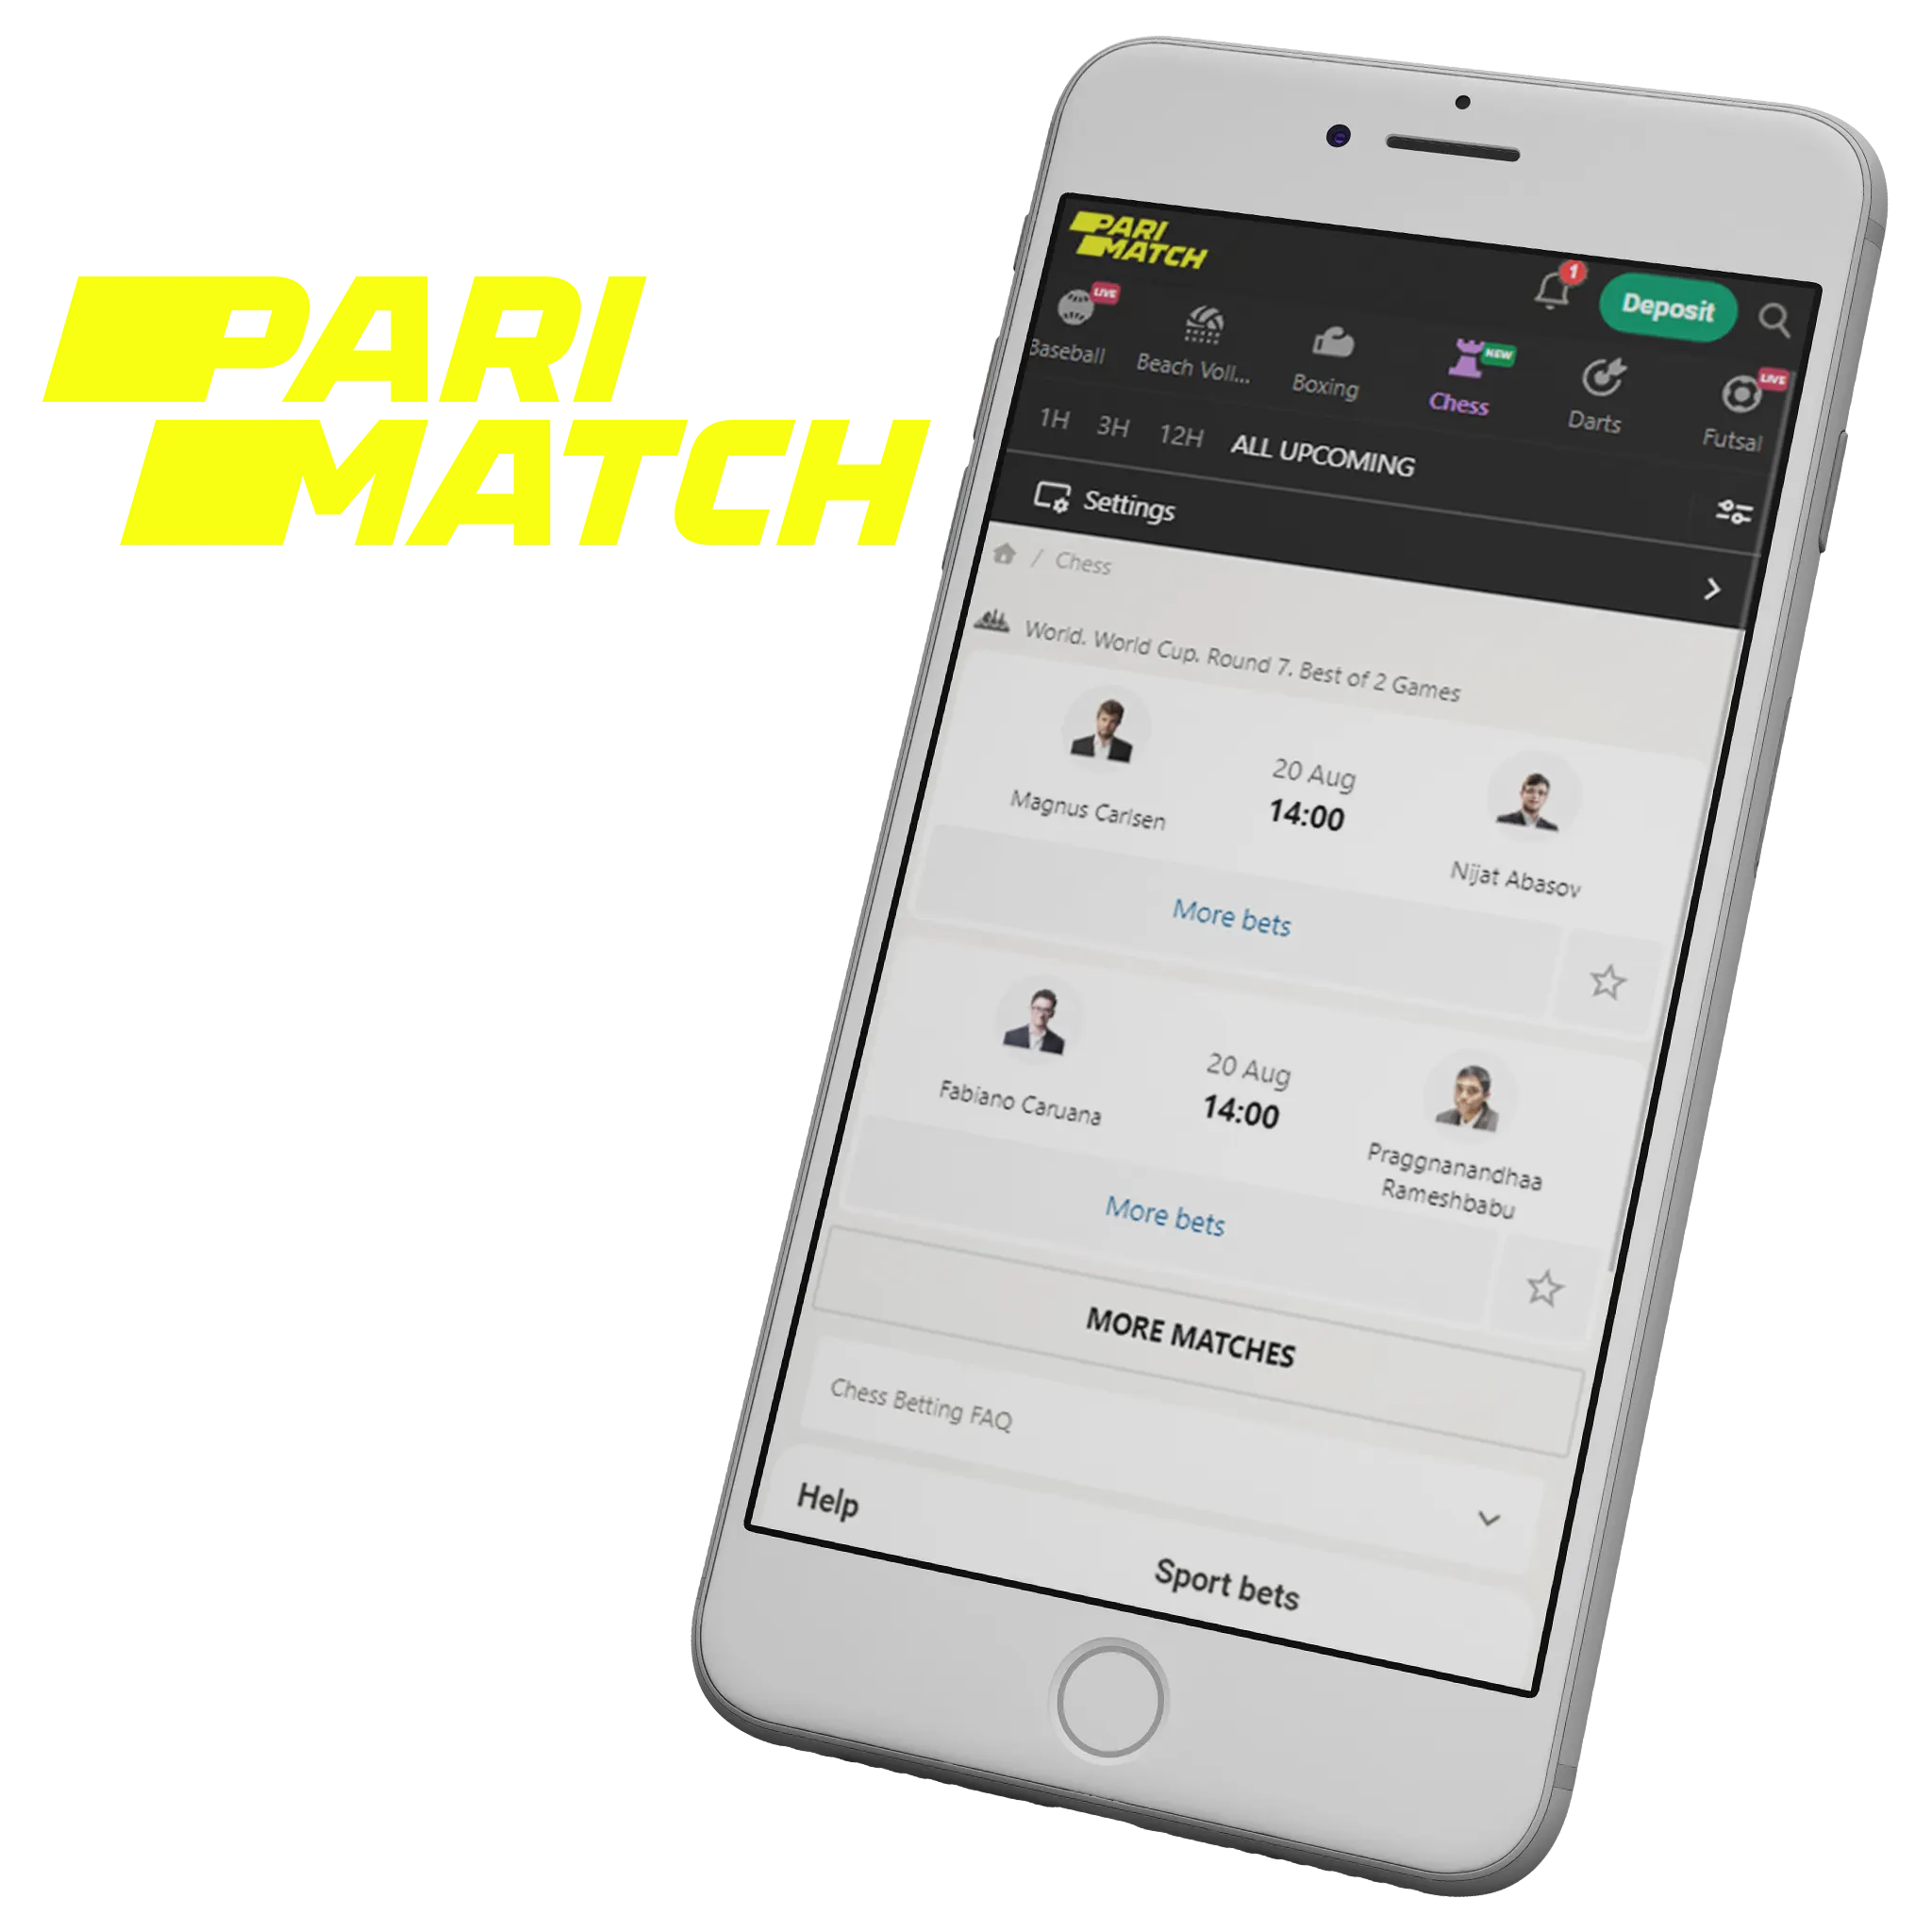 Download Parimatch app on Android and iOS and enjoy chess betting.